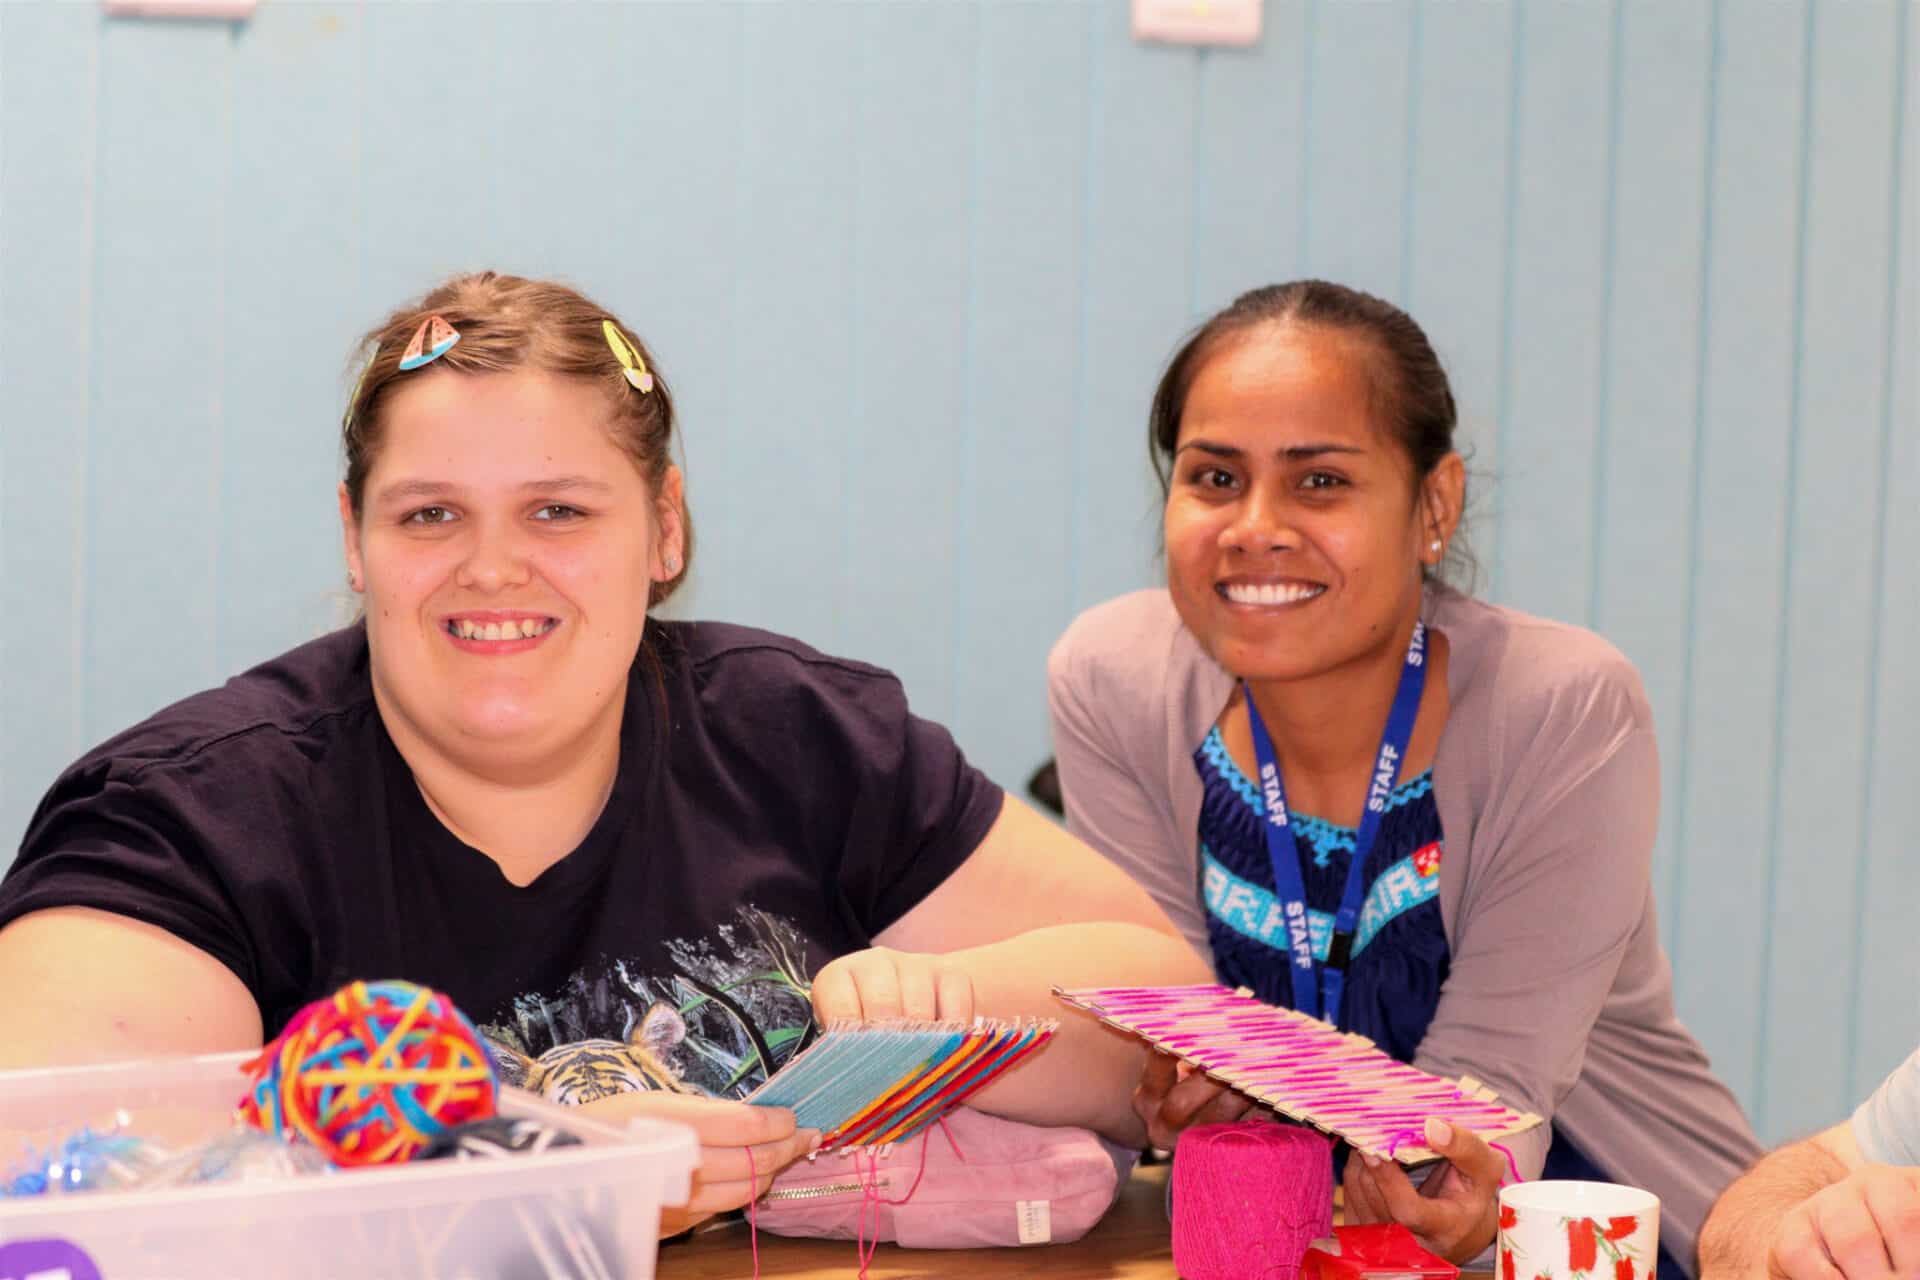 Two young women smile at the camera while holding a woollen craft activity.